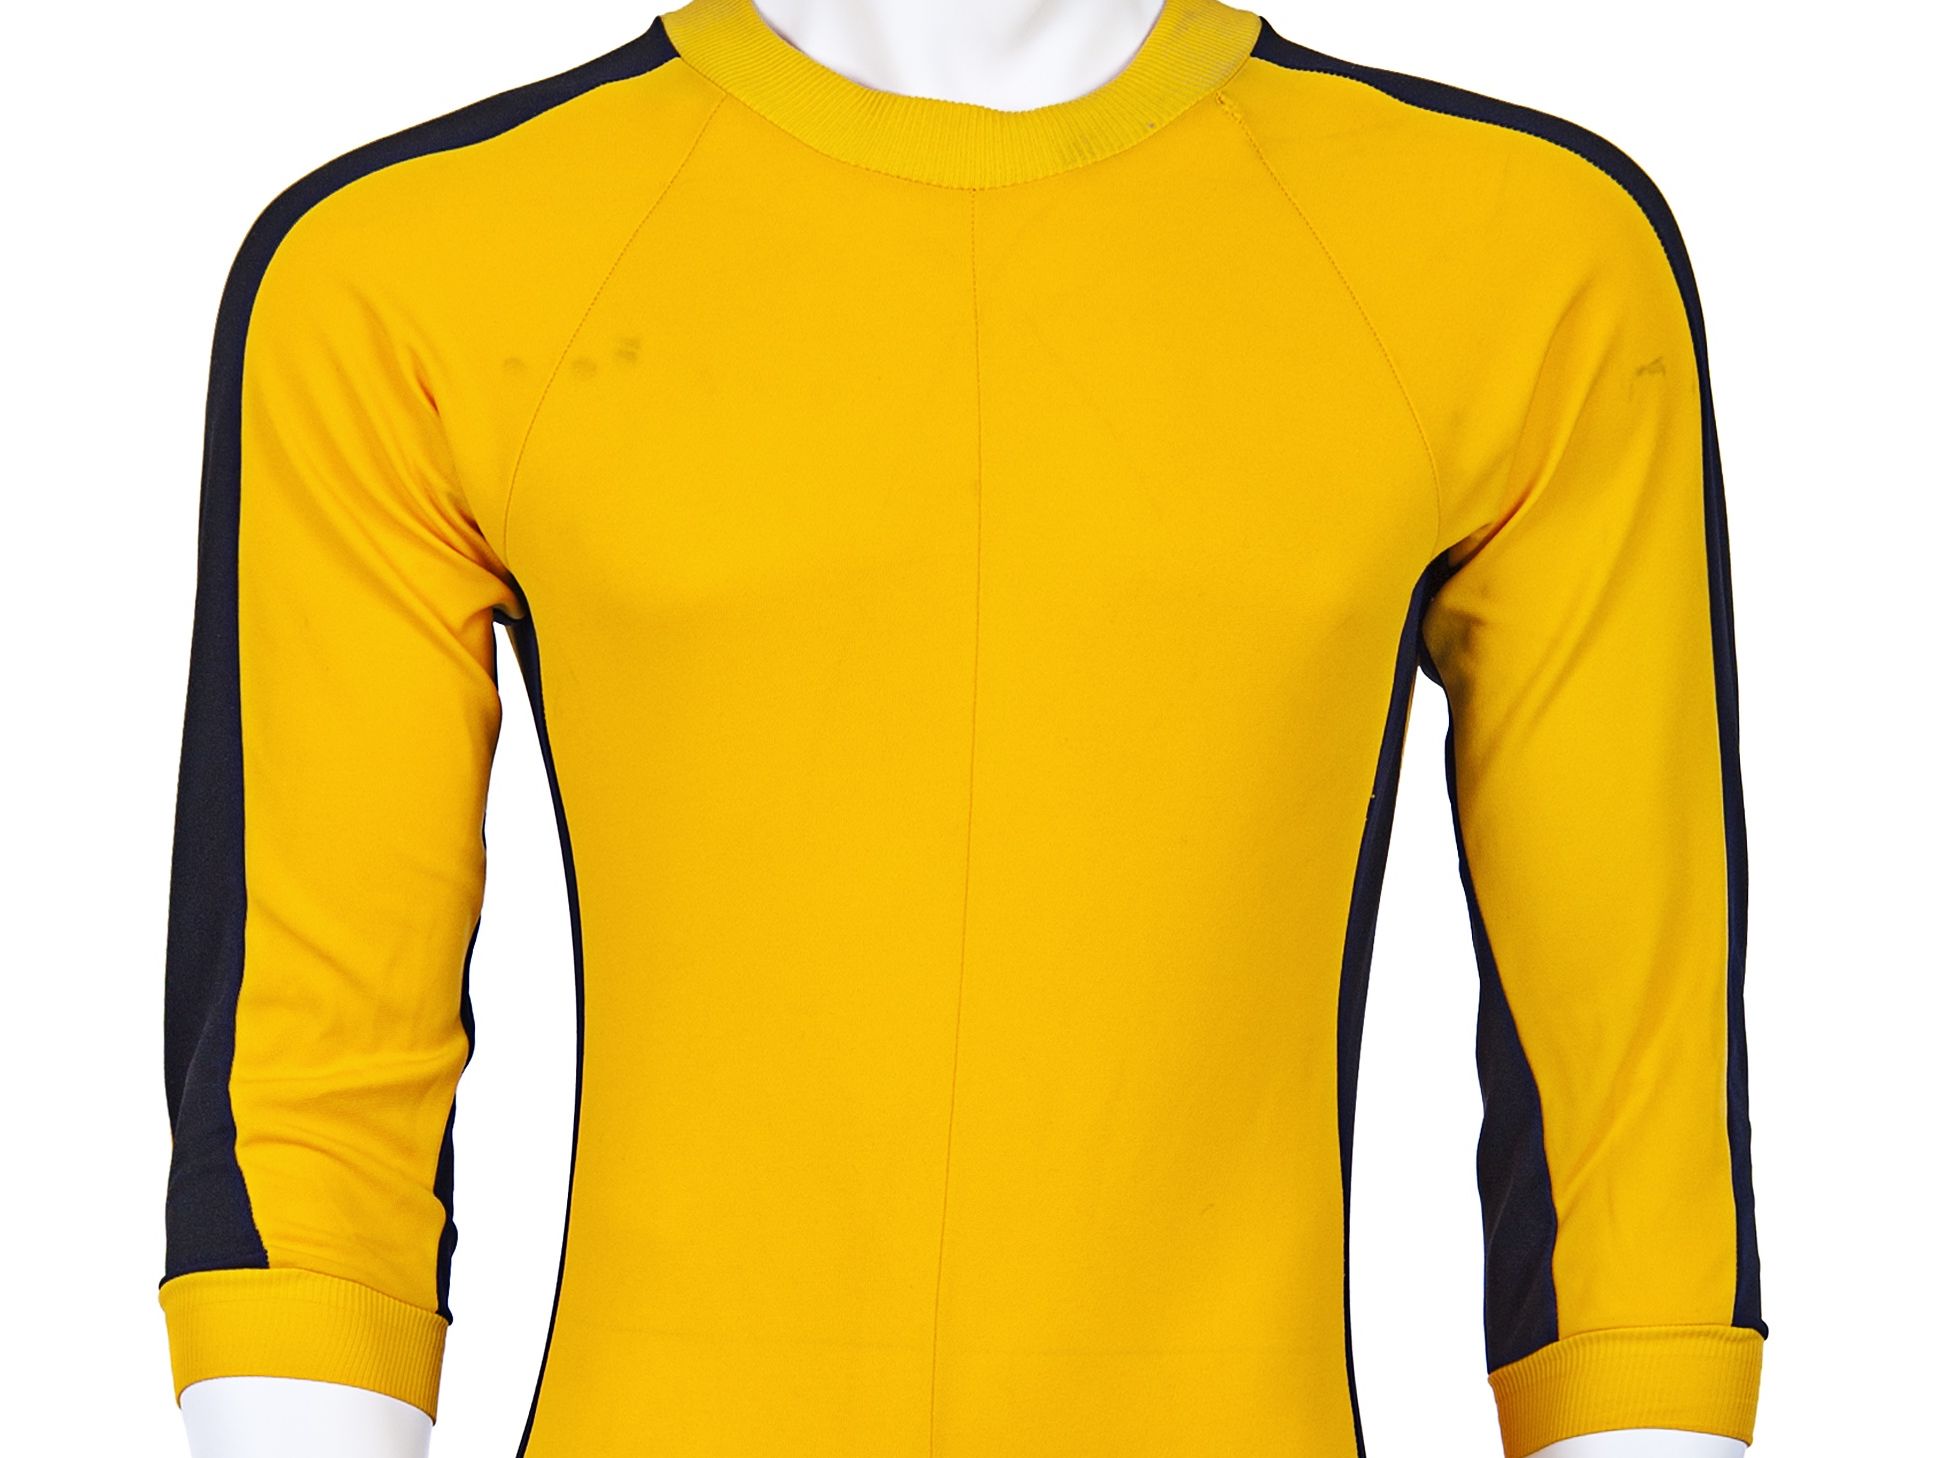 Bruce Lee's iconic jumpsuit fetches $100,000 at auction | CNN